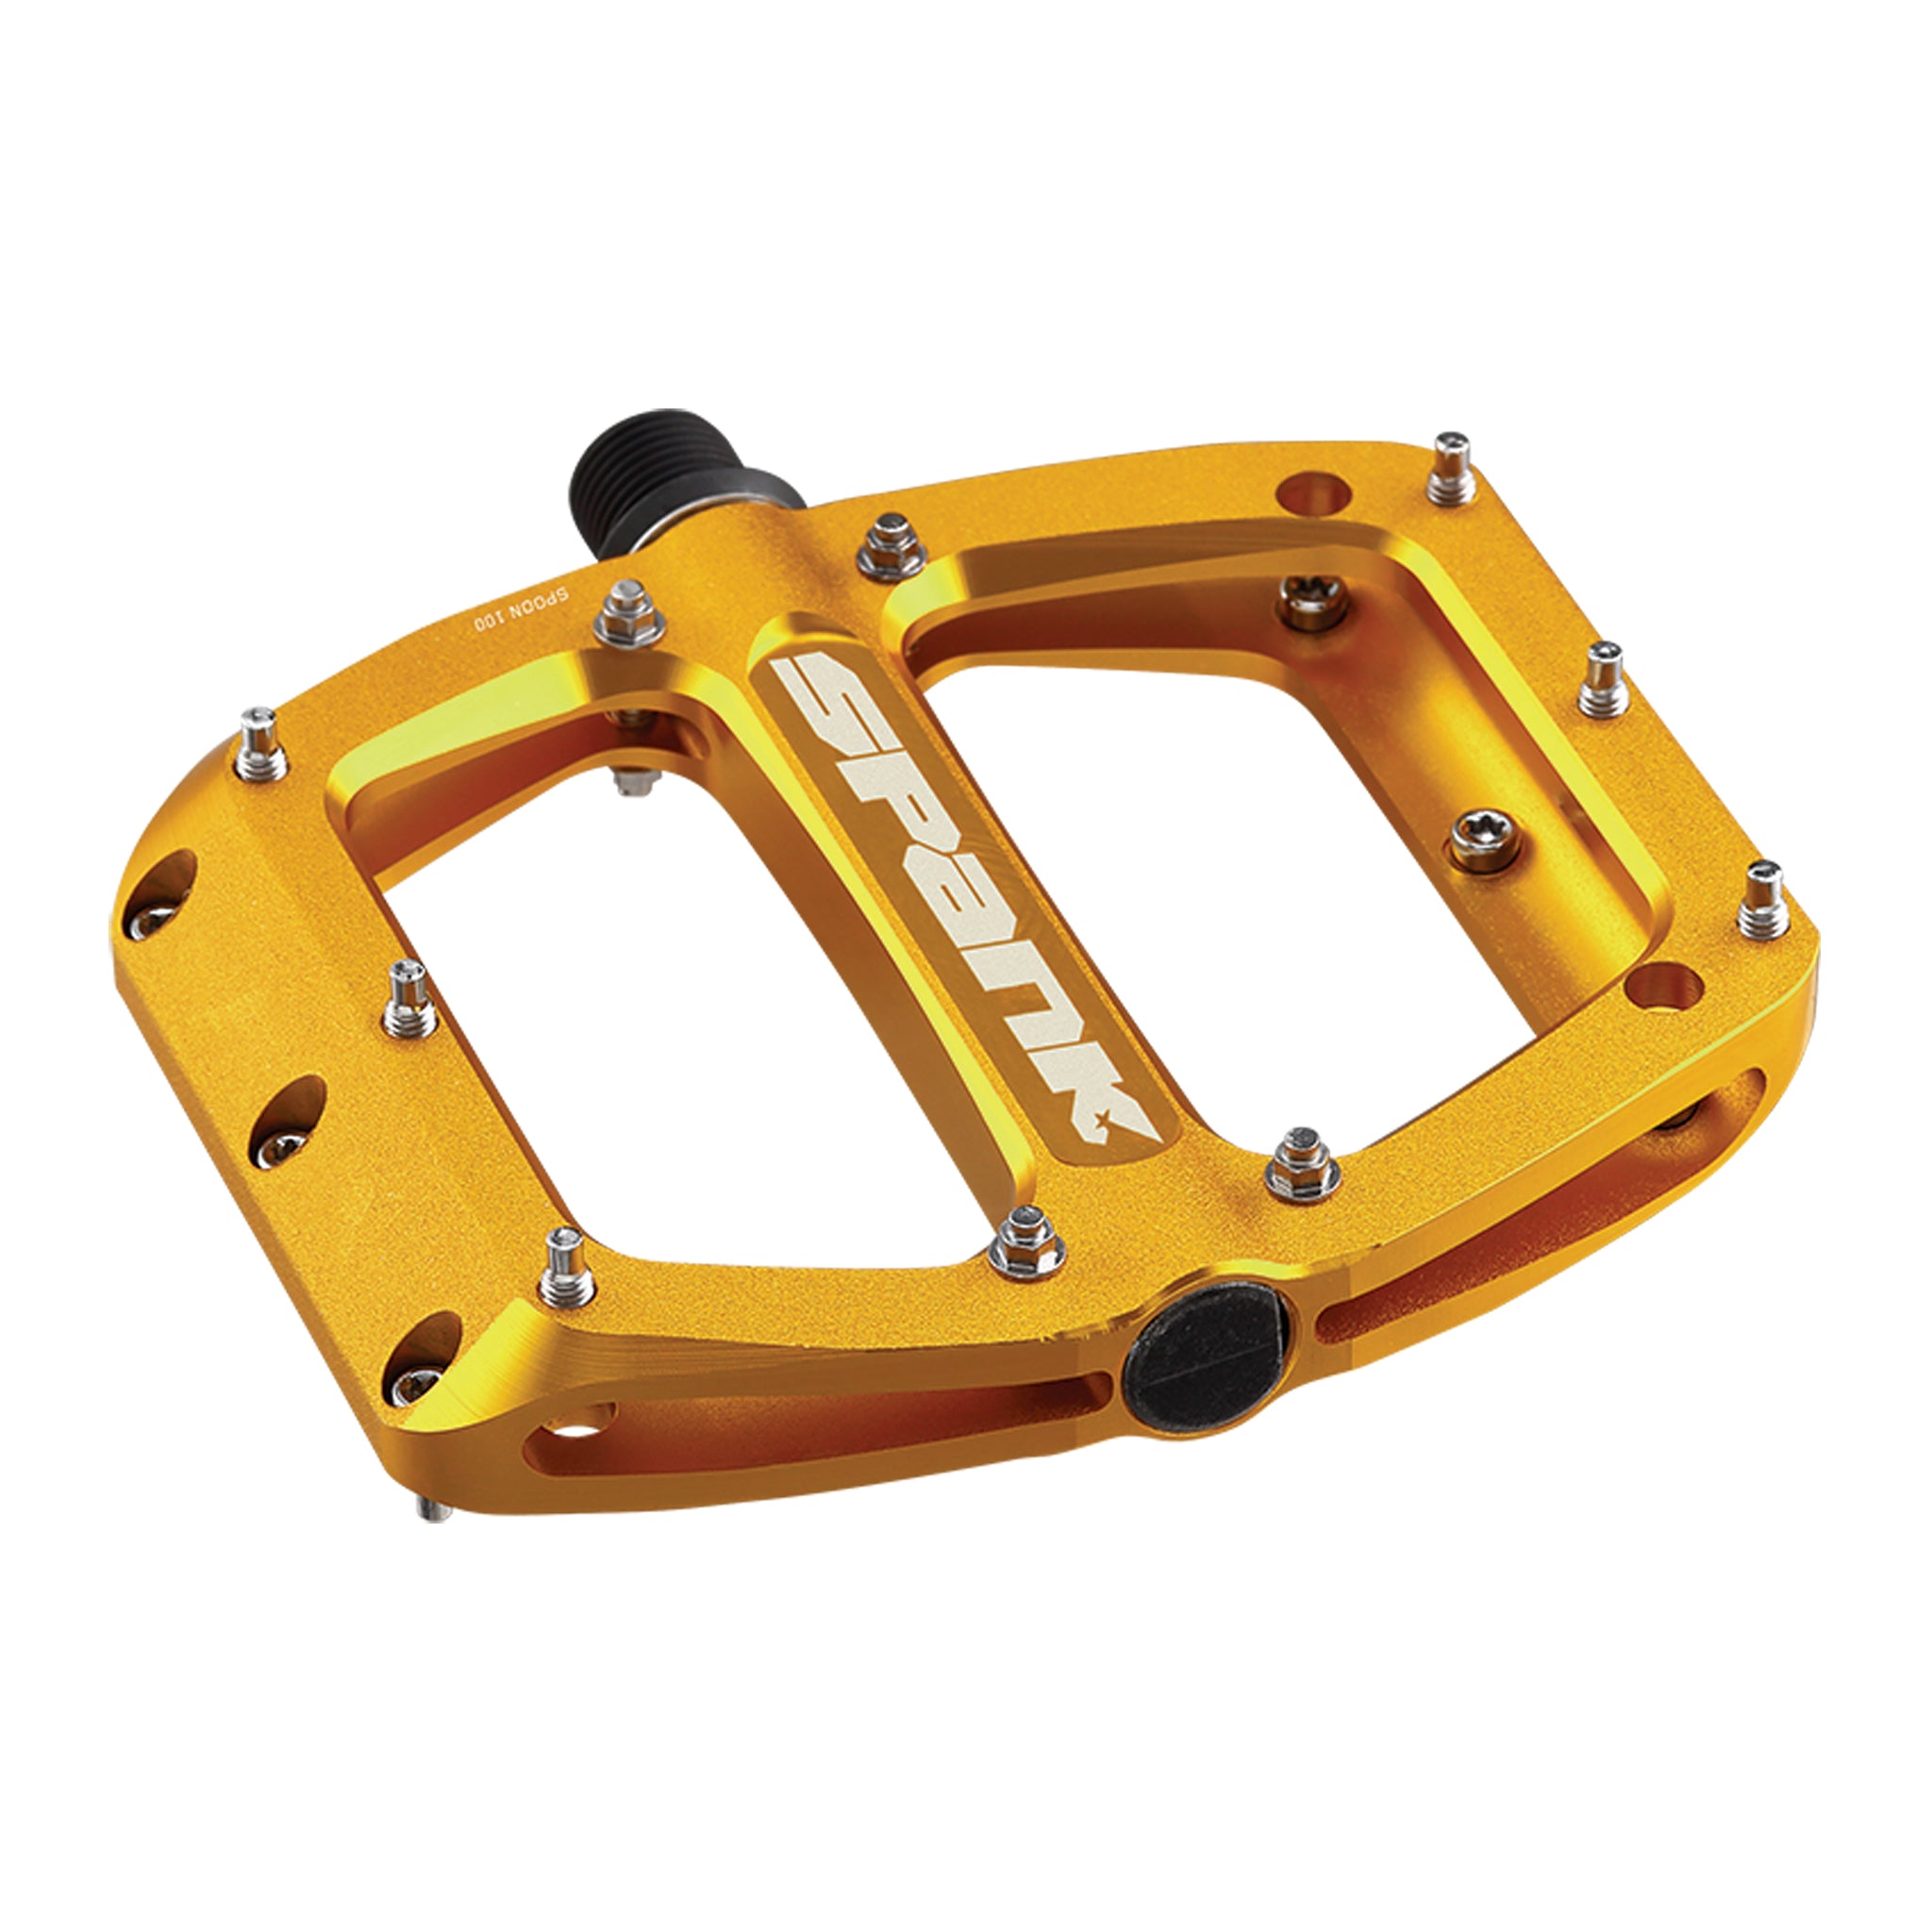 Spank Spoon 110 Pedals Gold